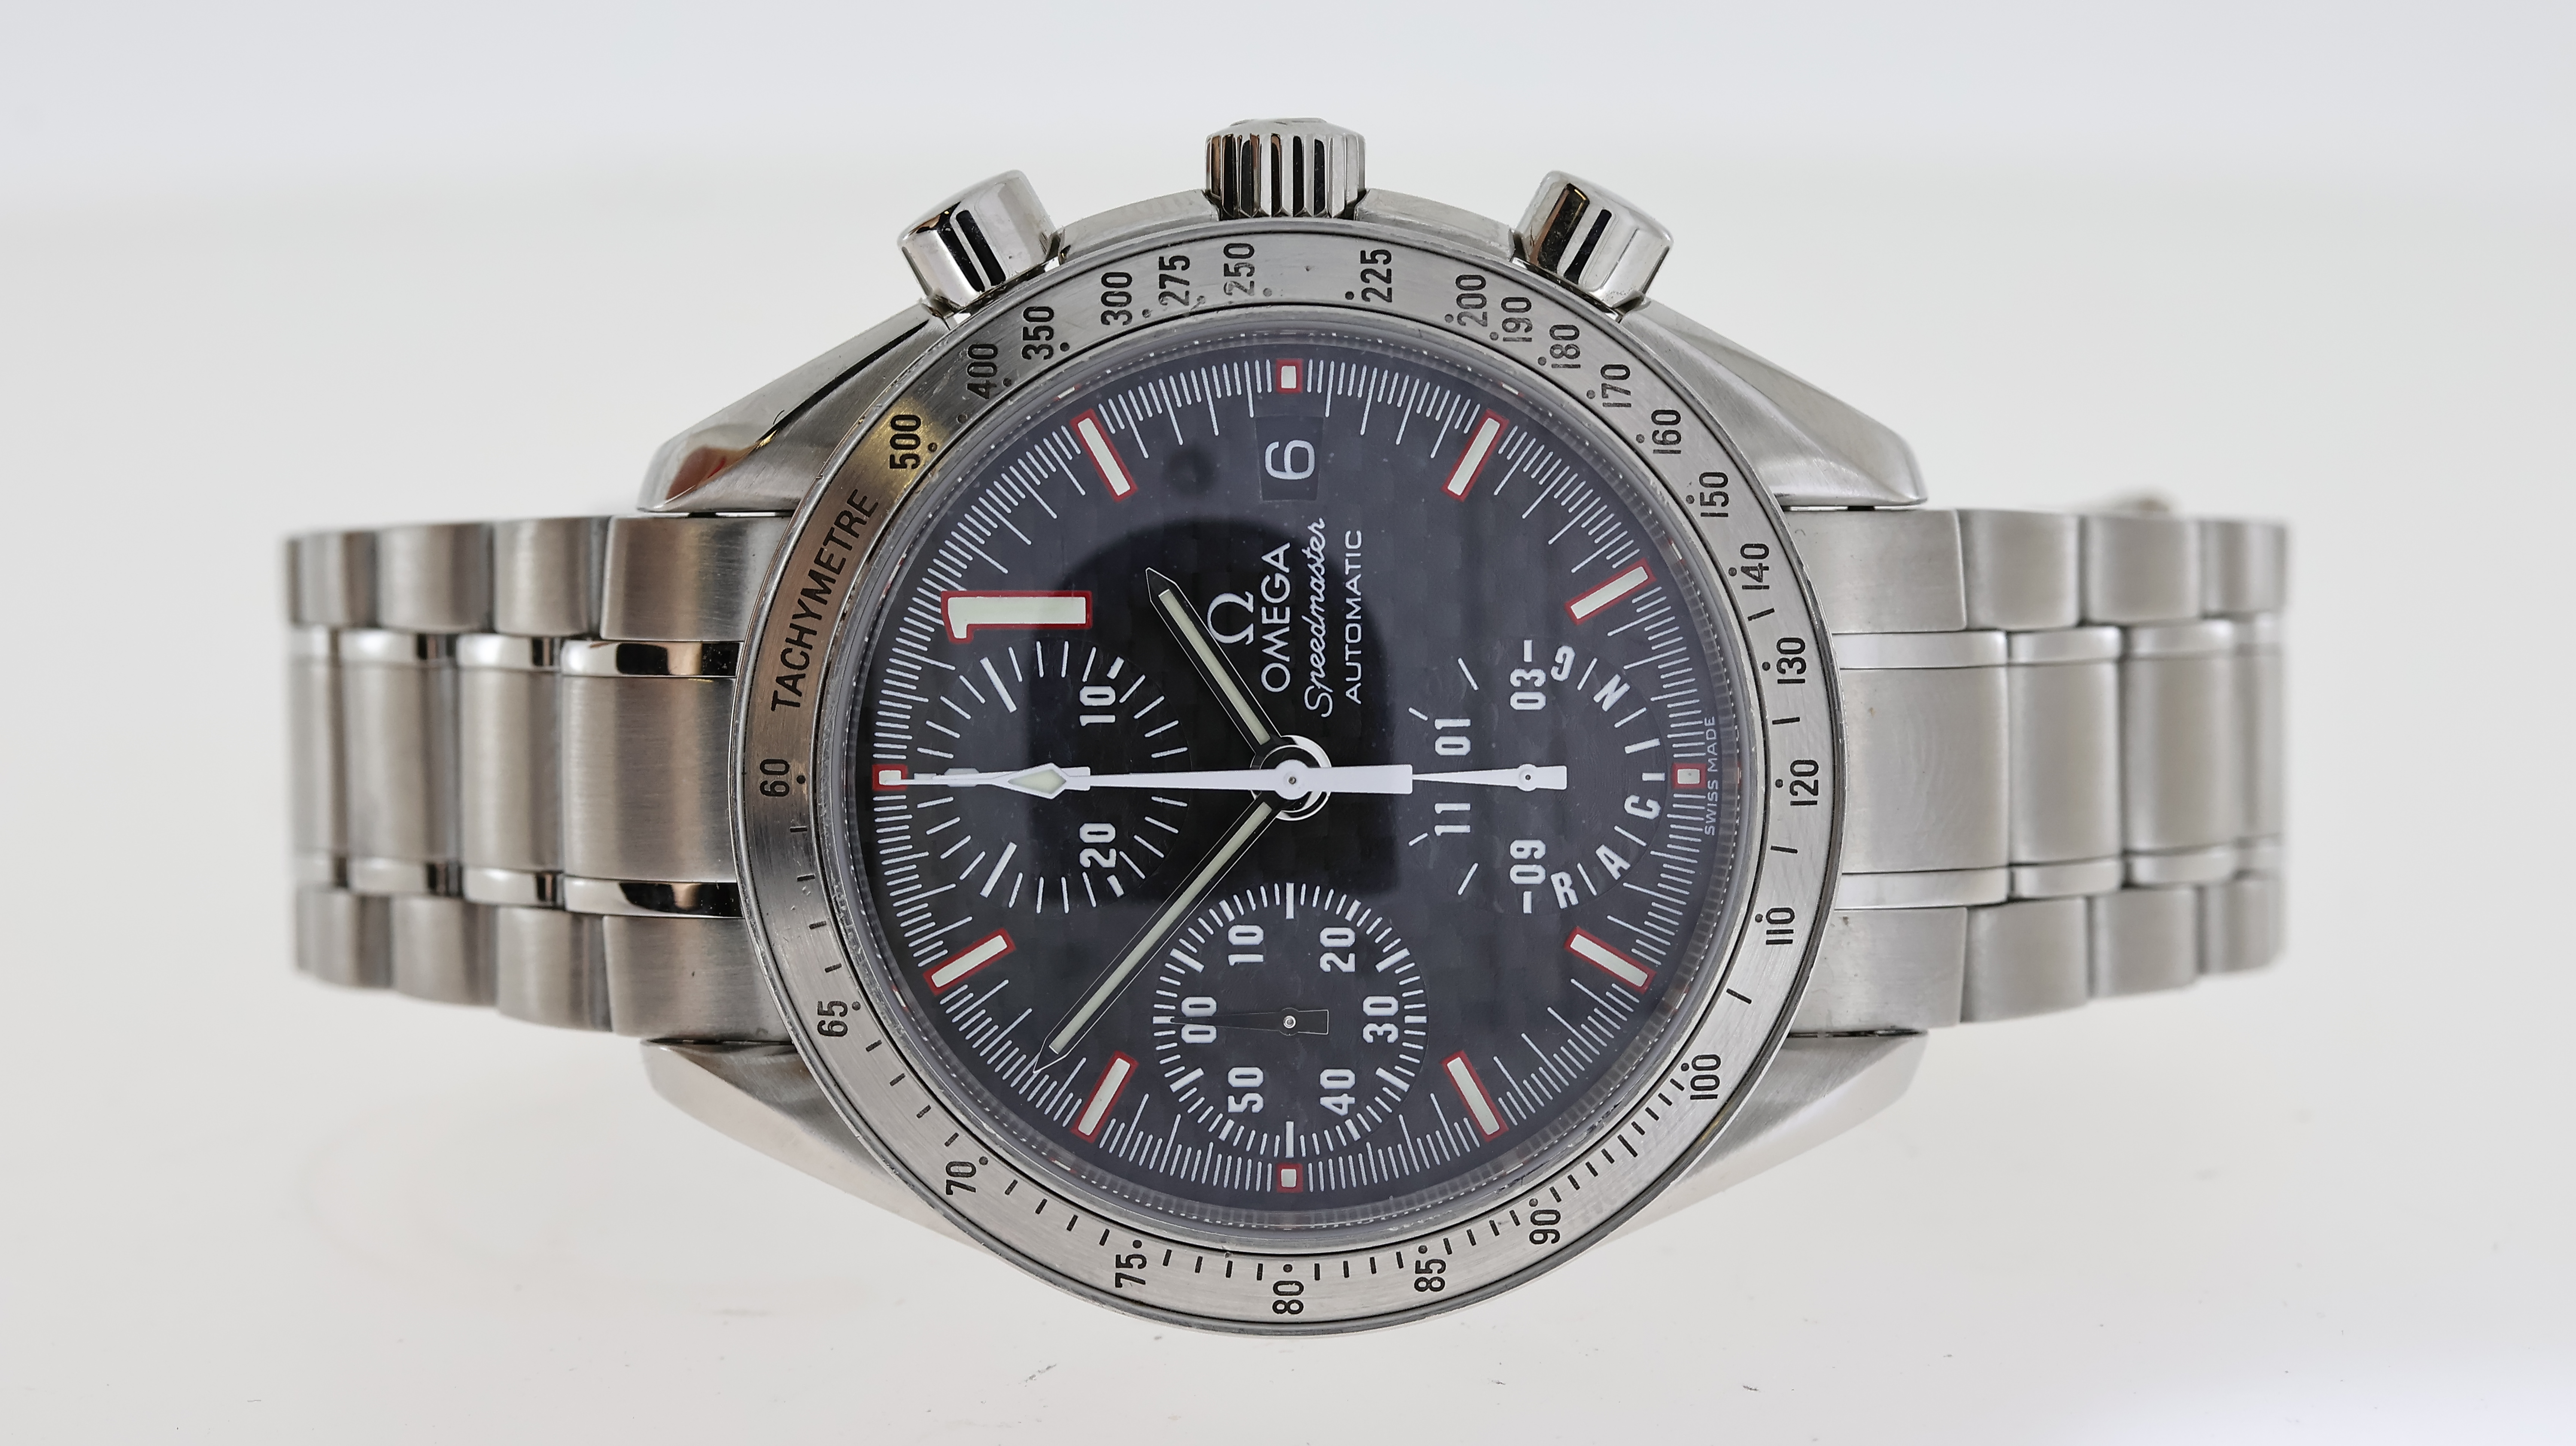 OMEGA SPEEDMASTER RACING MICHAEL SCHUMACHER BOX AND PAPERS 2005 - Image 2 of 5